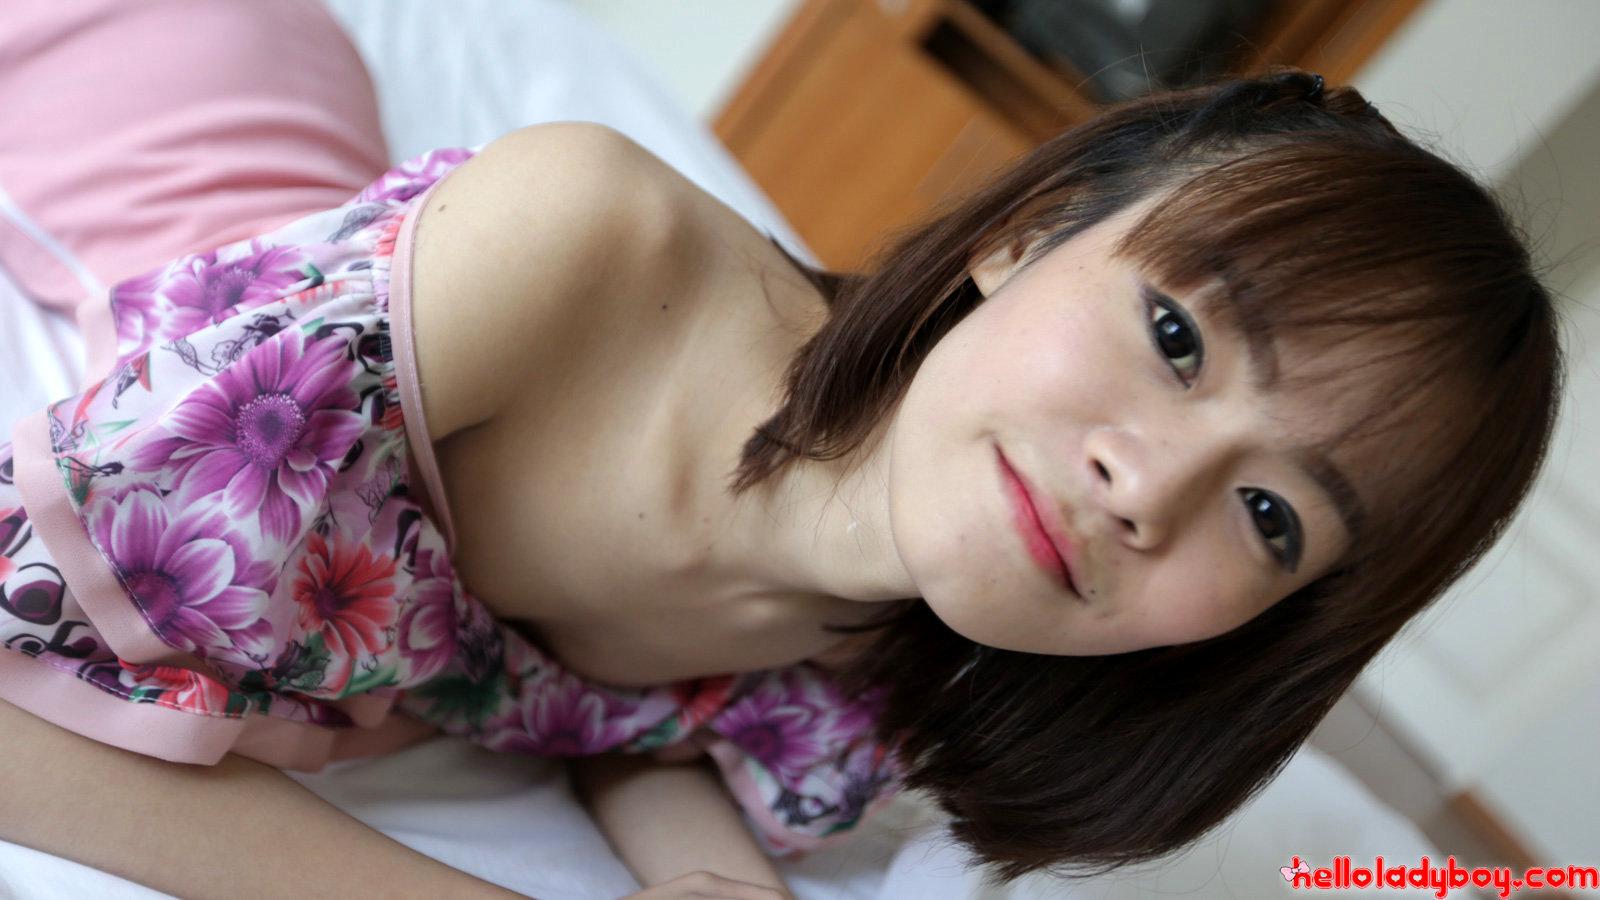 Asian Femboy Girl With A New Dildo